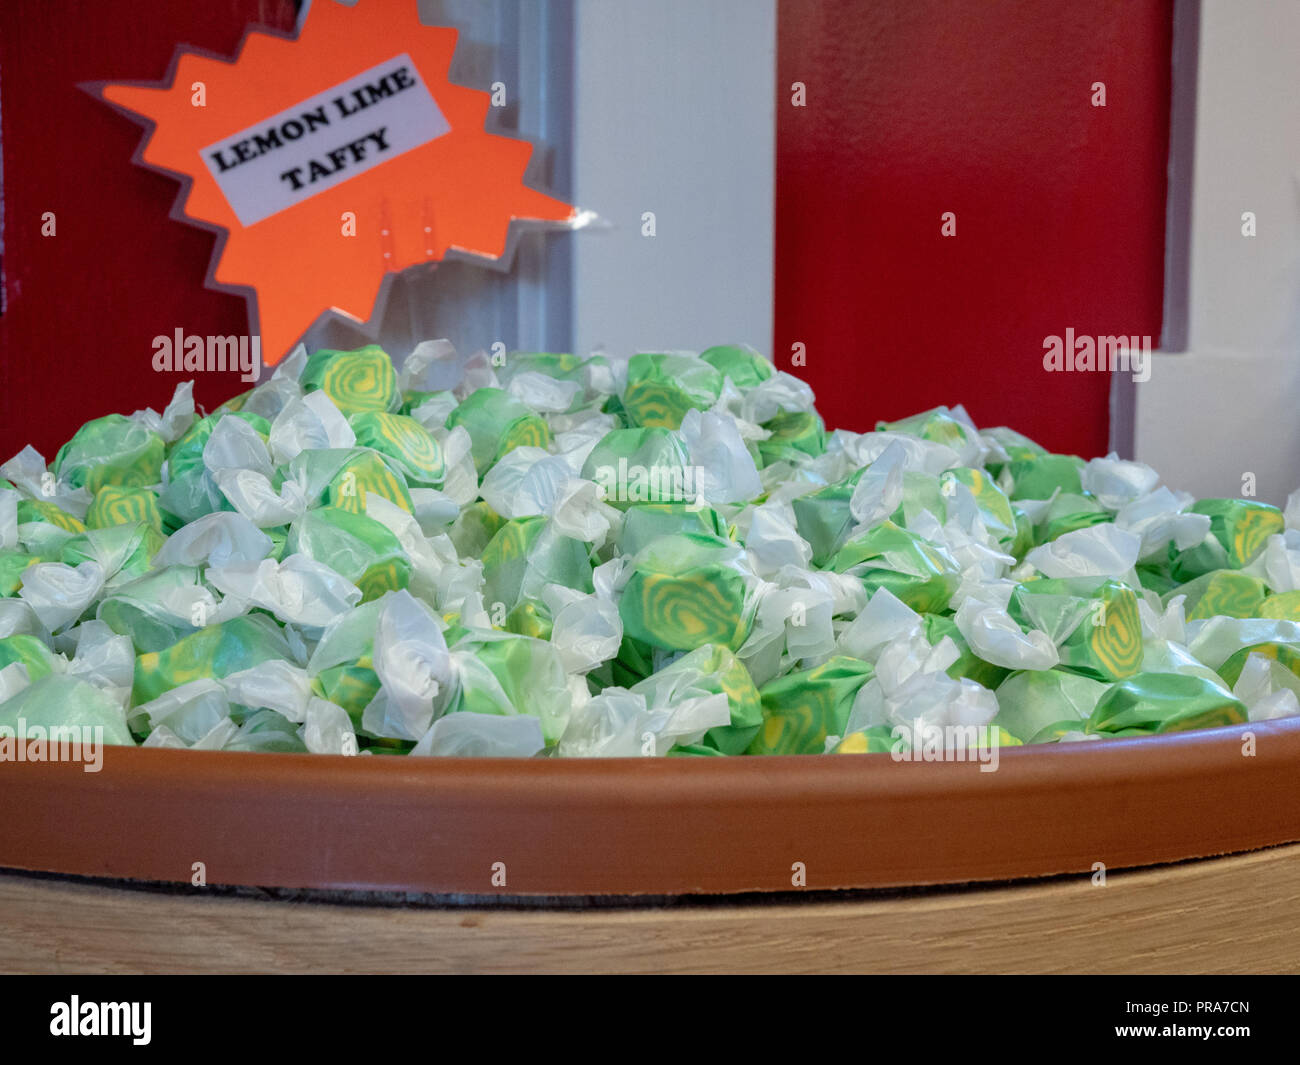 Lemon lime flavored taffy piled in a barrel with sign in store Stock Photo